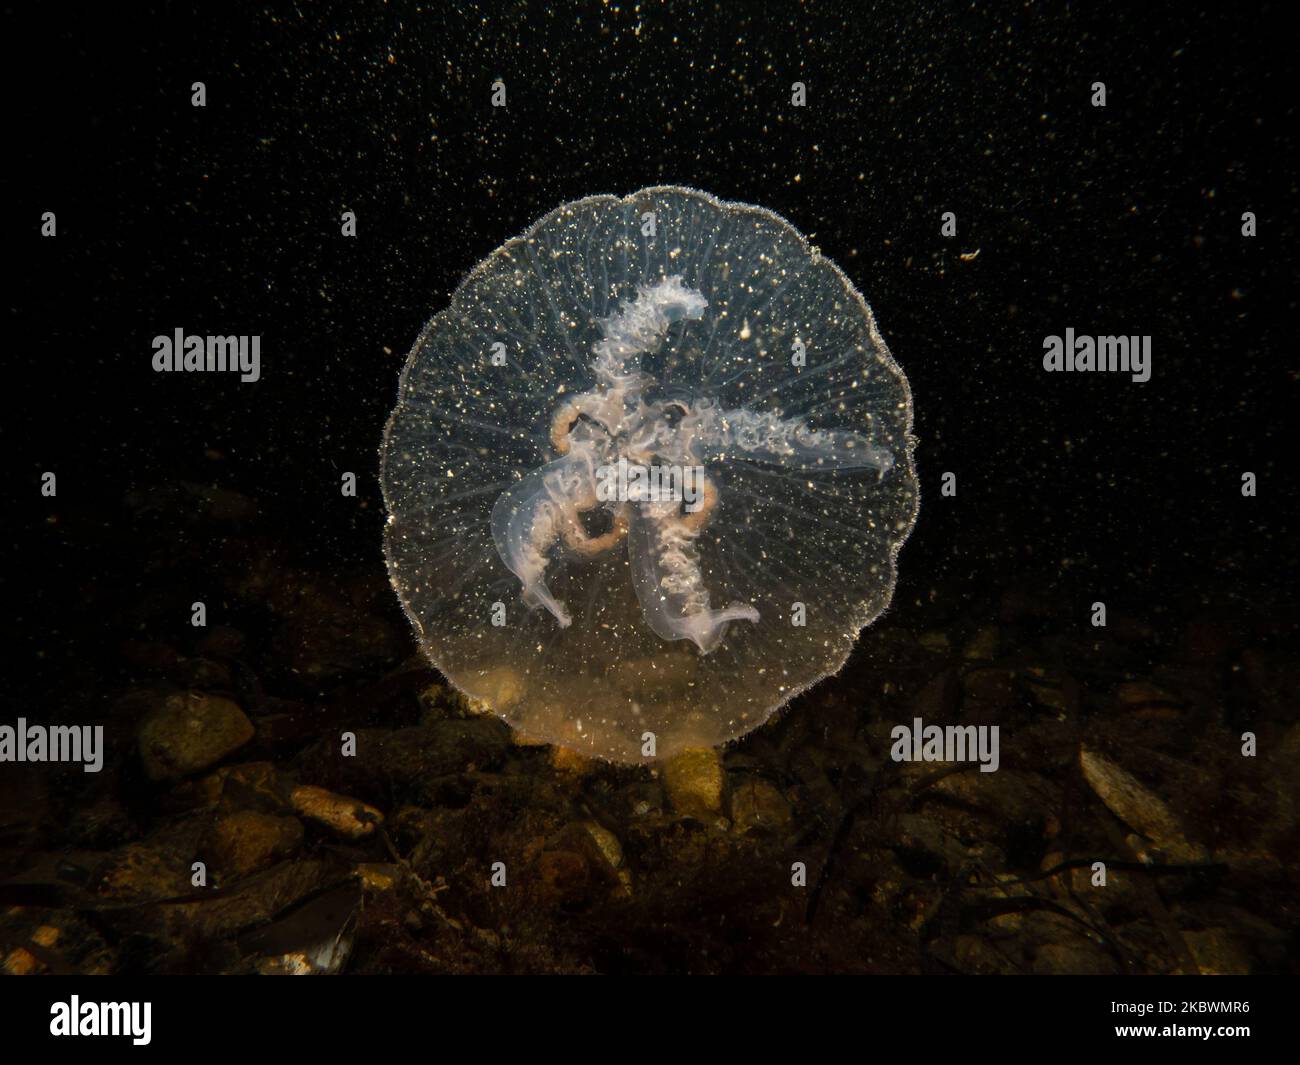 A close-up picture of a Moon jellyfish or Aurelia aurita with black seawater background. Picture from Oresund, Malmo Sweden. Cold water scuba diving Stock Photo